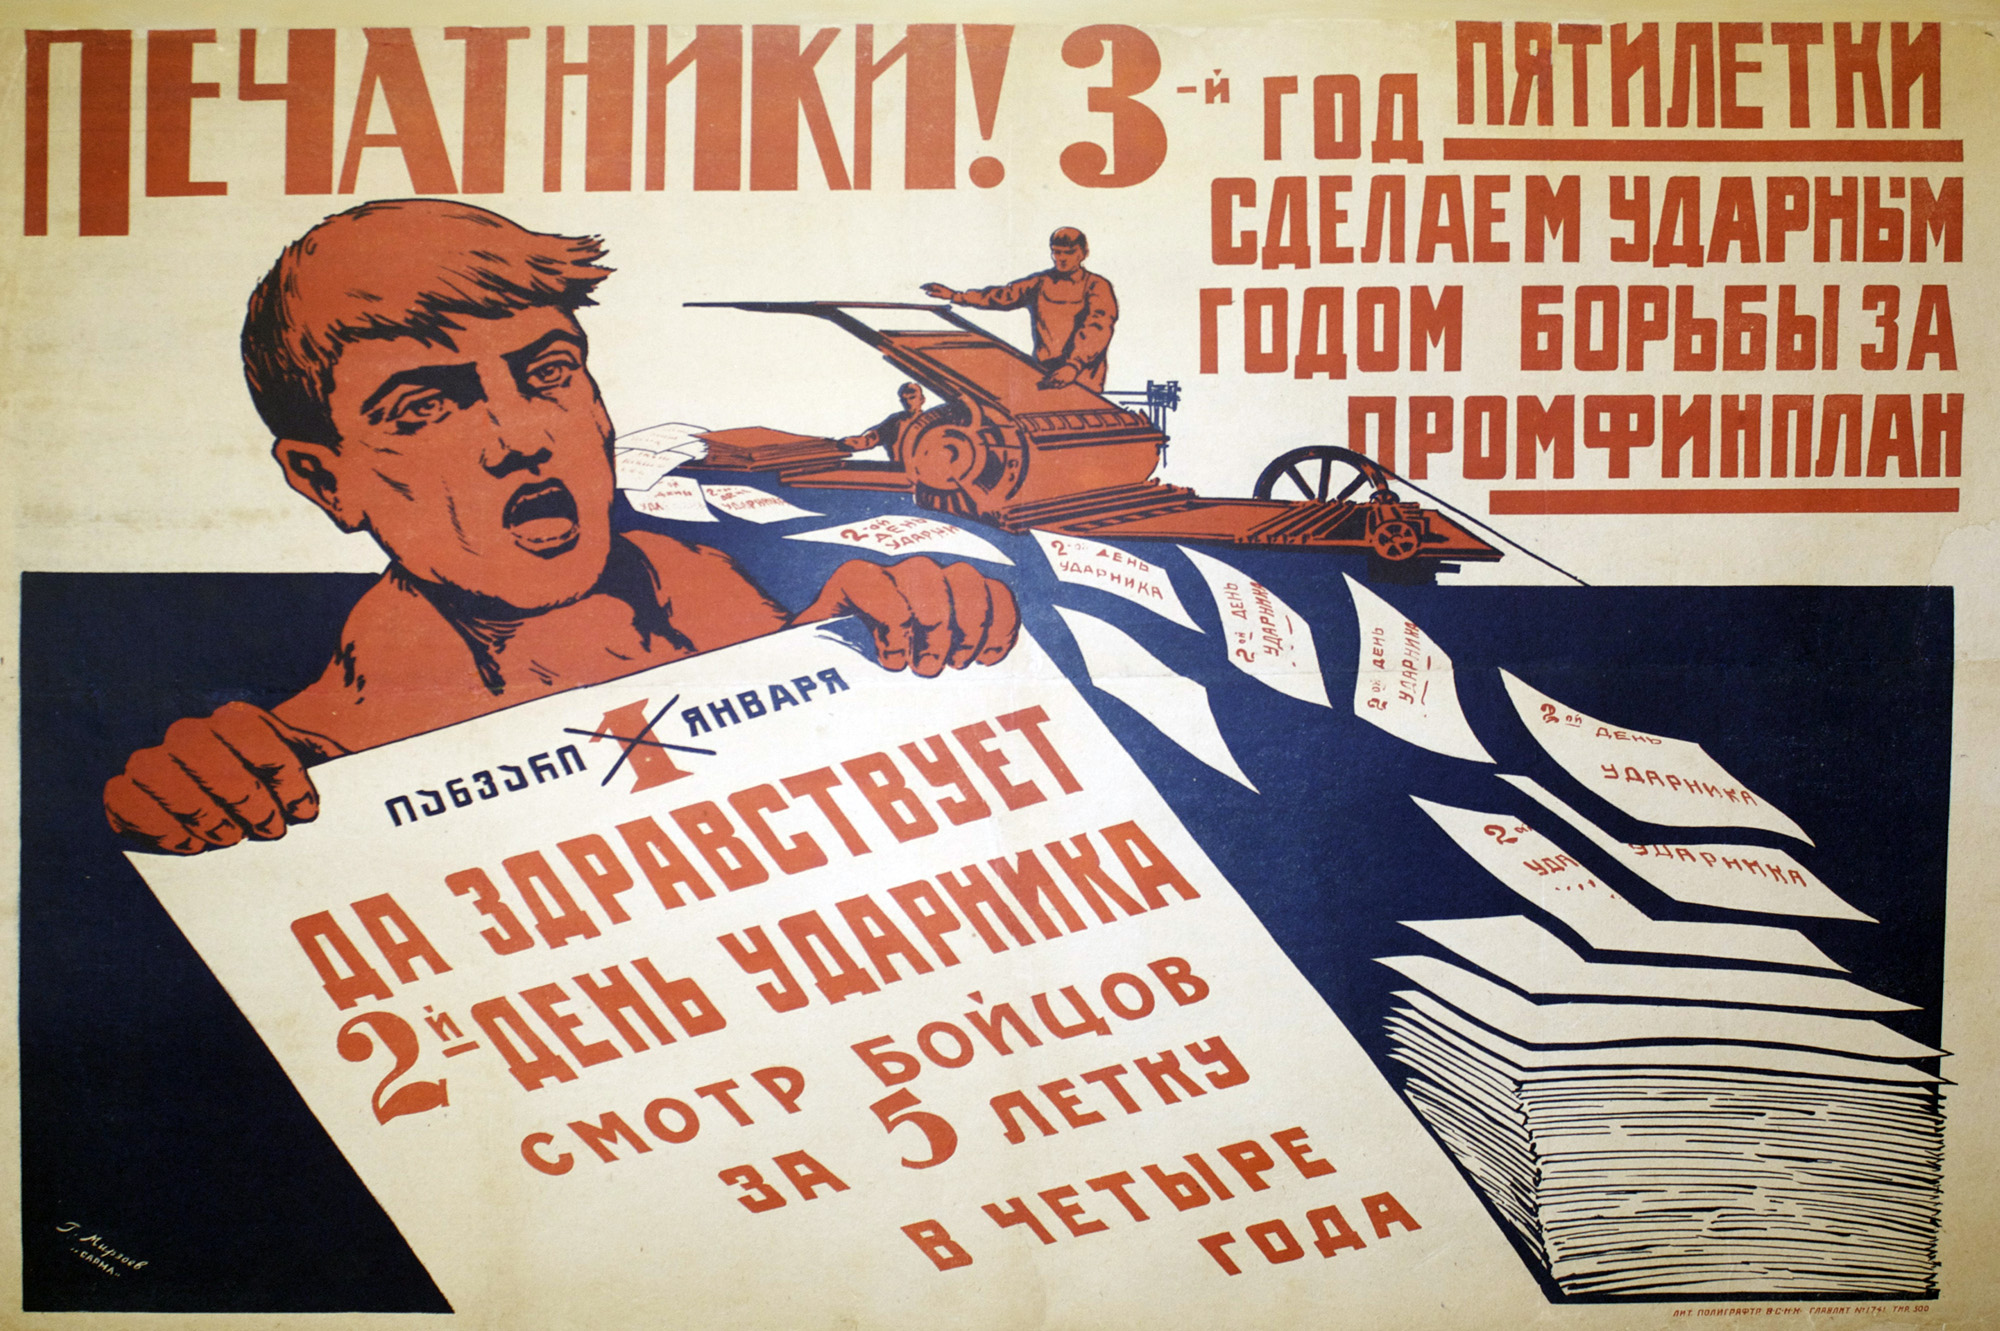 Printers!
Let’s make the Third Year of the Five-Year Plan a Shock-Worker Year by Fighting to Fulfill the Promfinplan'.
January 1st [in Russian and Georgian]. 
Long Live the 2nd Day of the Shock-Worker. 
Review of Fighters who Should Fulfill the Five-Year Plan in Four Years